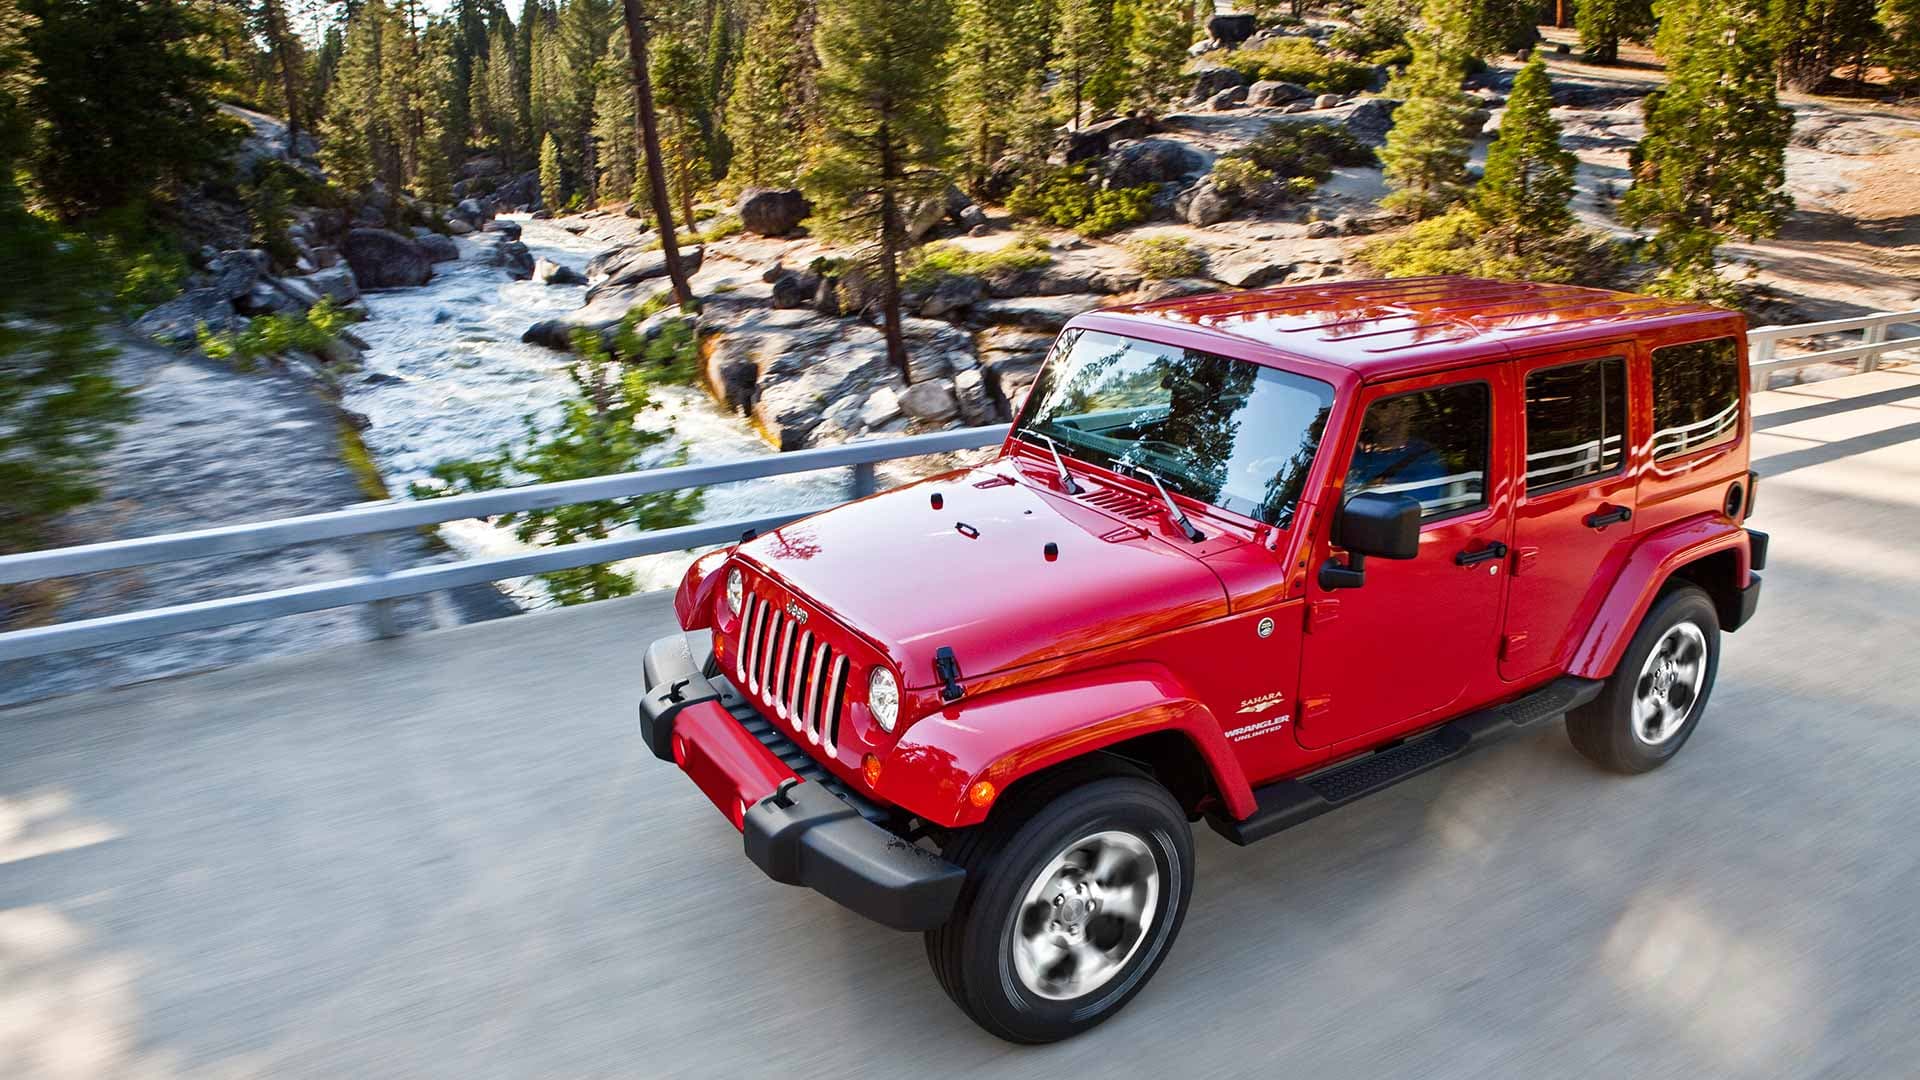 The Jeep Wrangler Gets Aluminum Doors and FCA Builds A 300hp Fiat 124 Spider: The Evening Rush